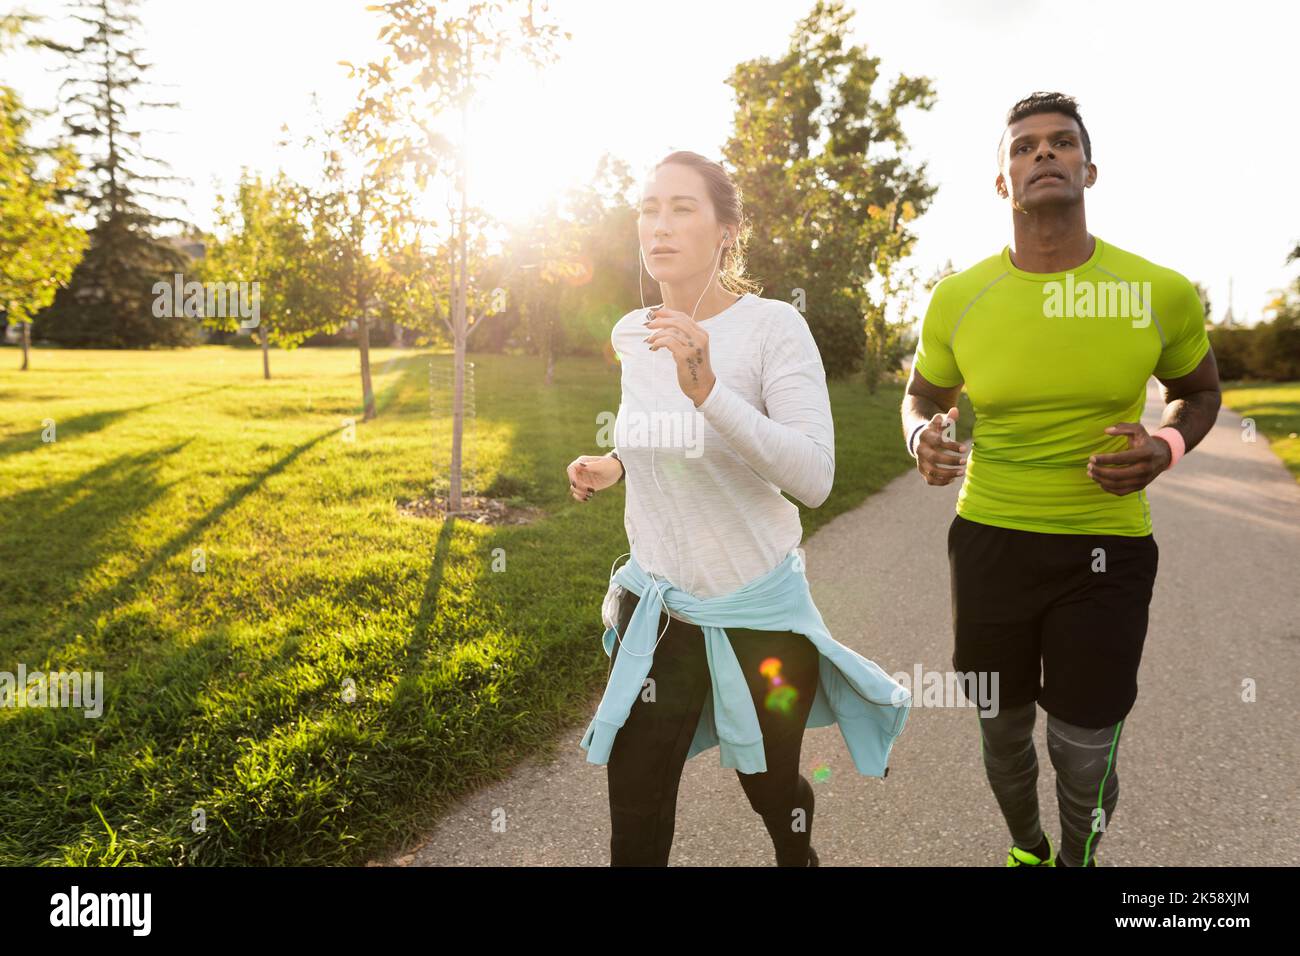 Two people running in park in sunlight Stock Photo